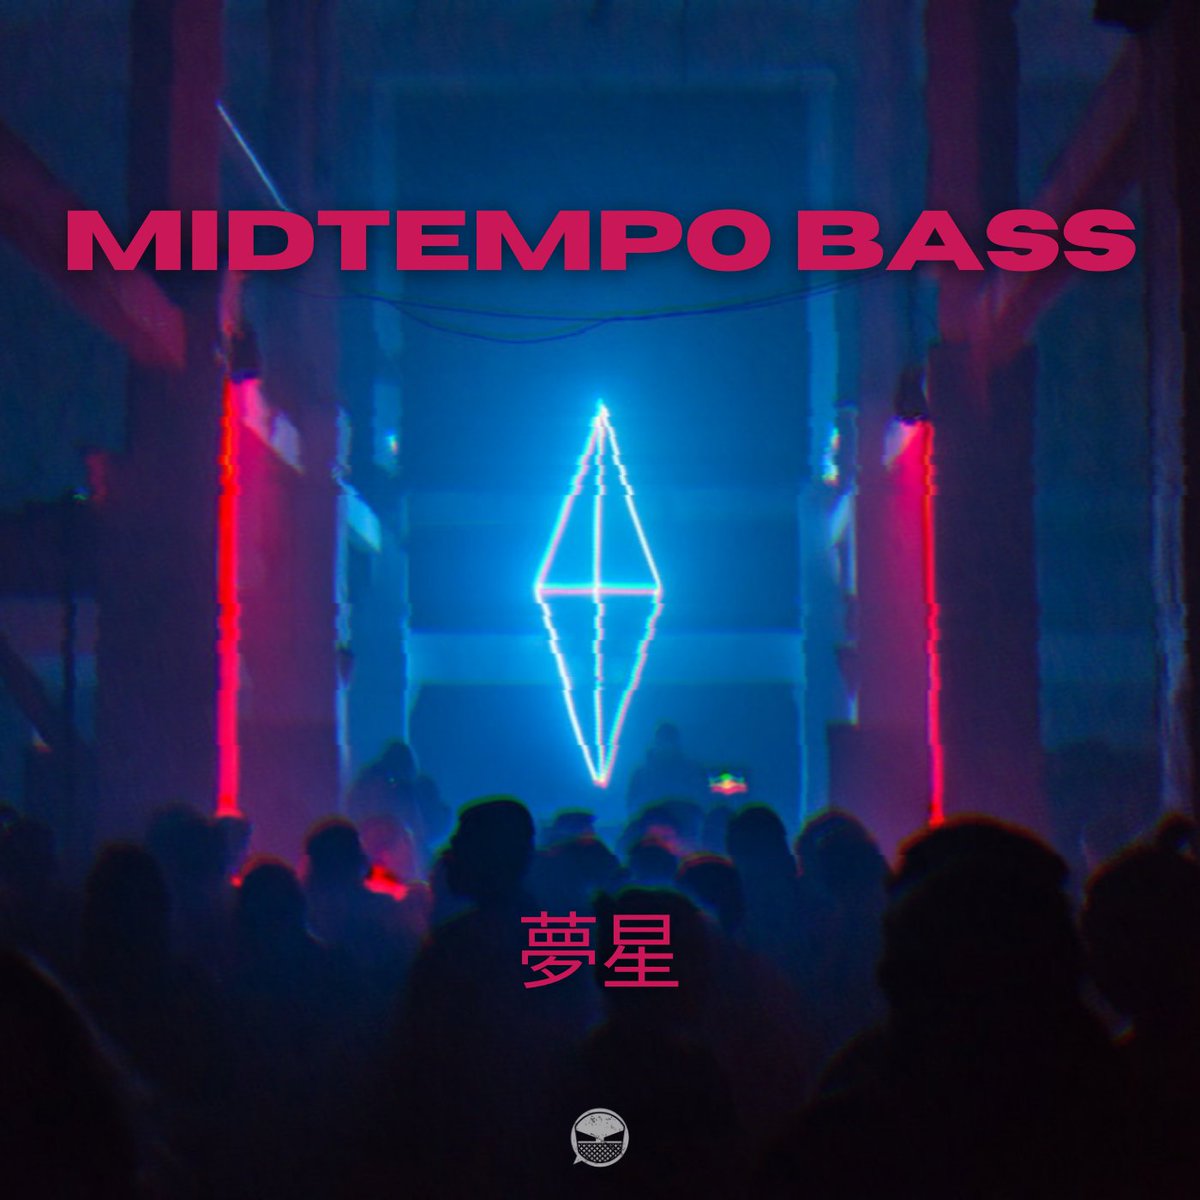 The best Spotify playlist for cutting edge midtempo, has been updated with new music from: @LAZERPUNKMUSIC @Toneboxmusic @DeathPixieGamer @AURALUMBRA Playlist link in the comment section